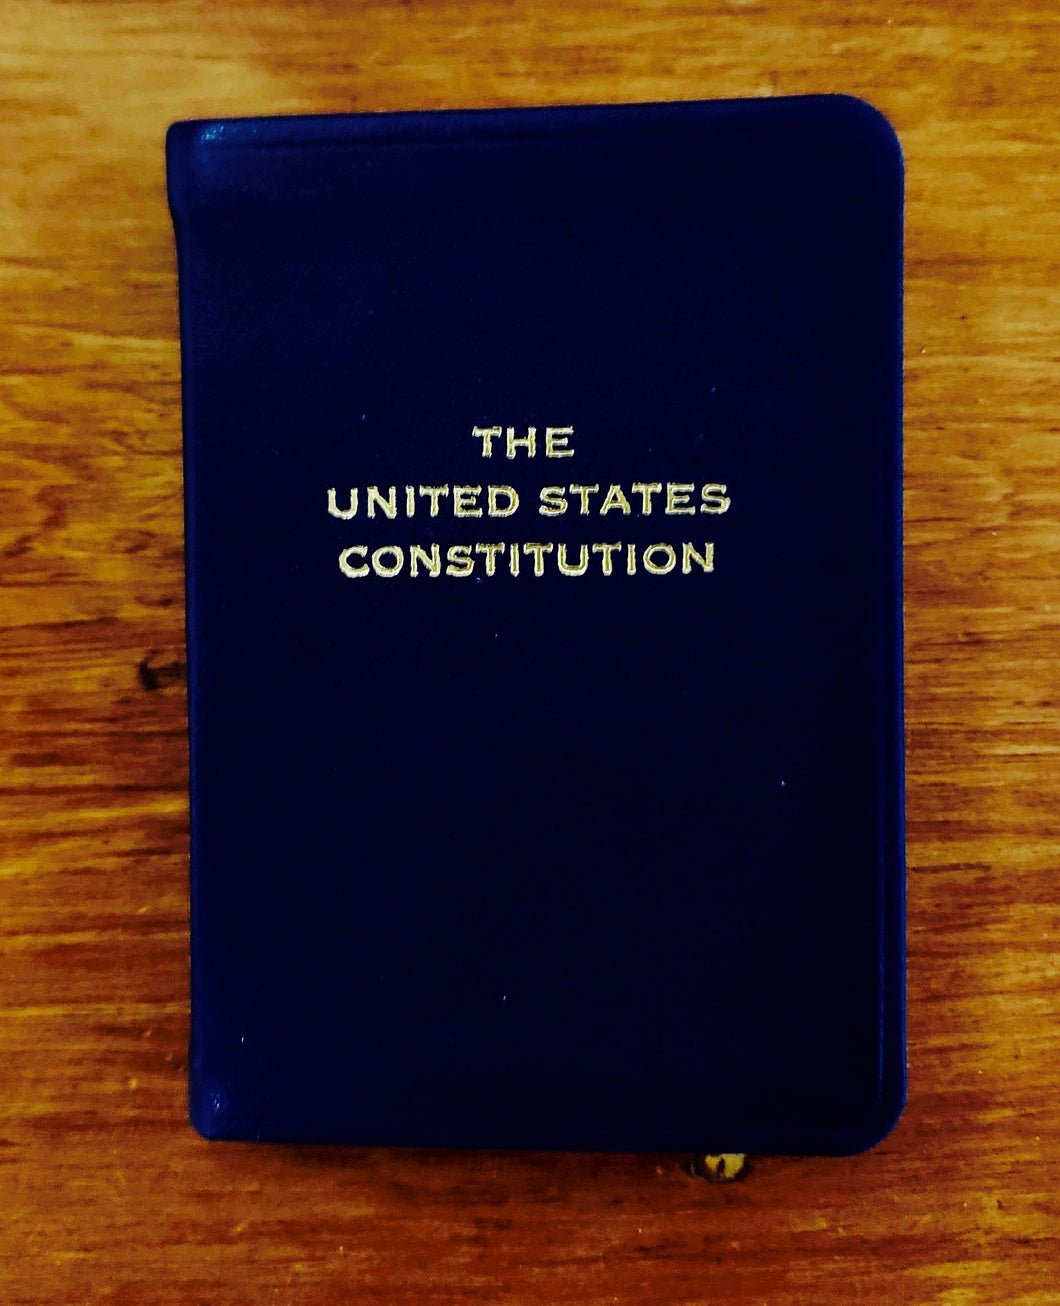 Leather-Bound Constitution and Declaration, shirt pocket-sized - Navy Blue